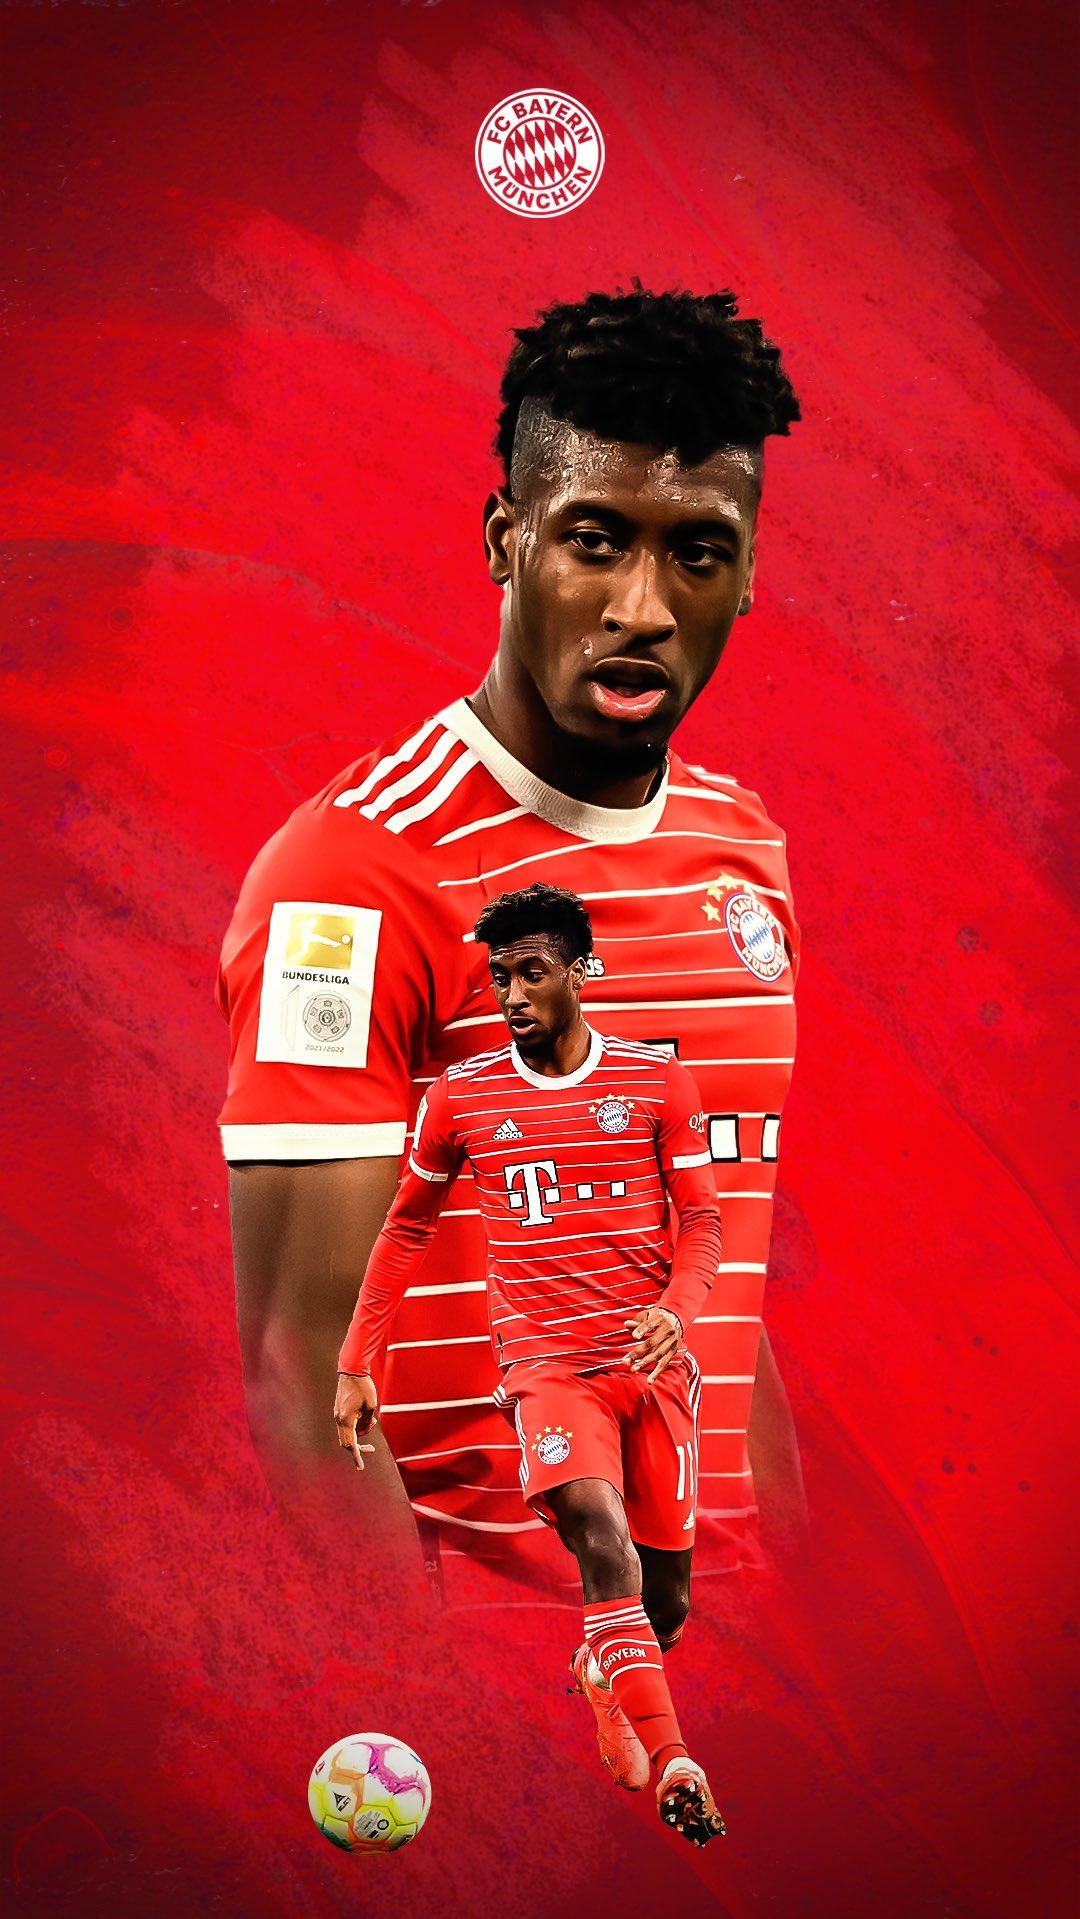 Fc Bayern Munich On Some New Background For